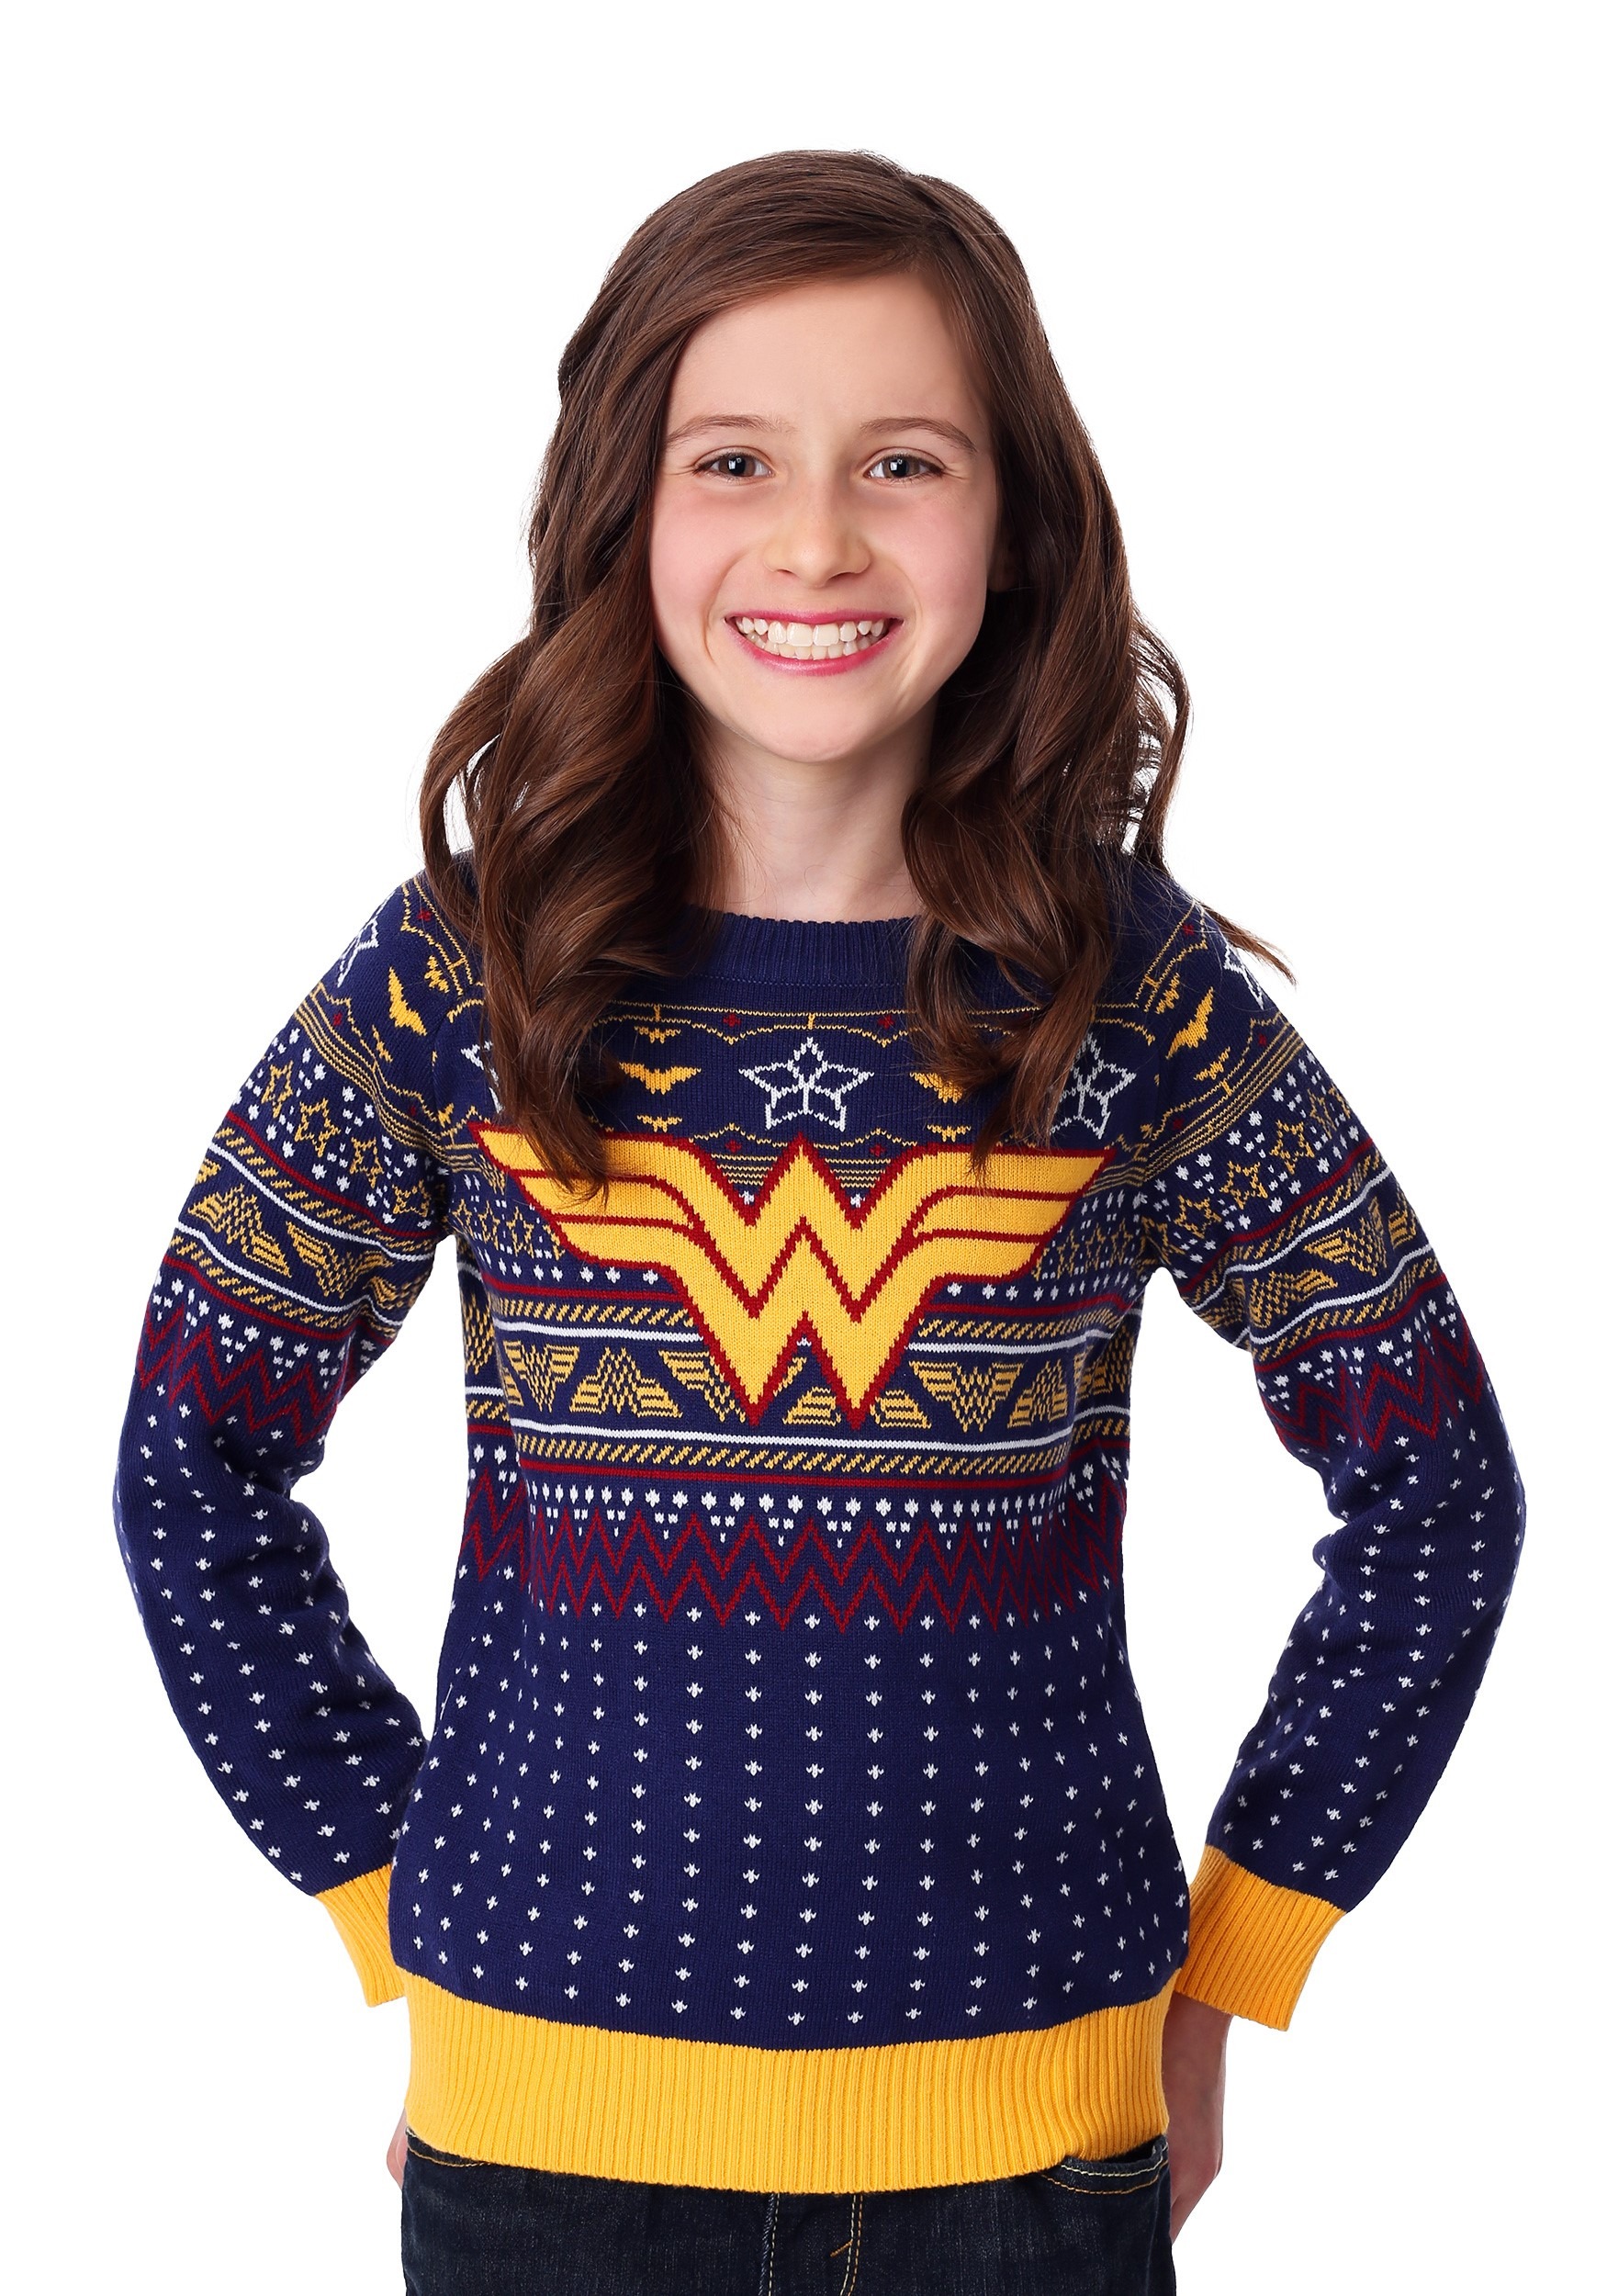 Kid's Wonder Woman Navy Ugly Christmas Sweater - image 1 of 4